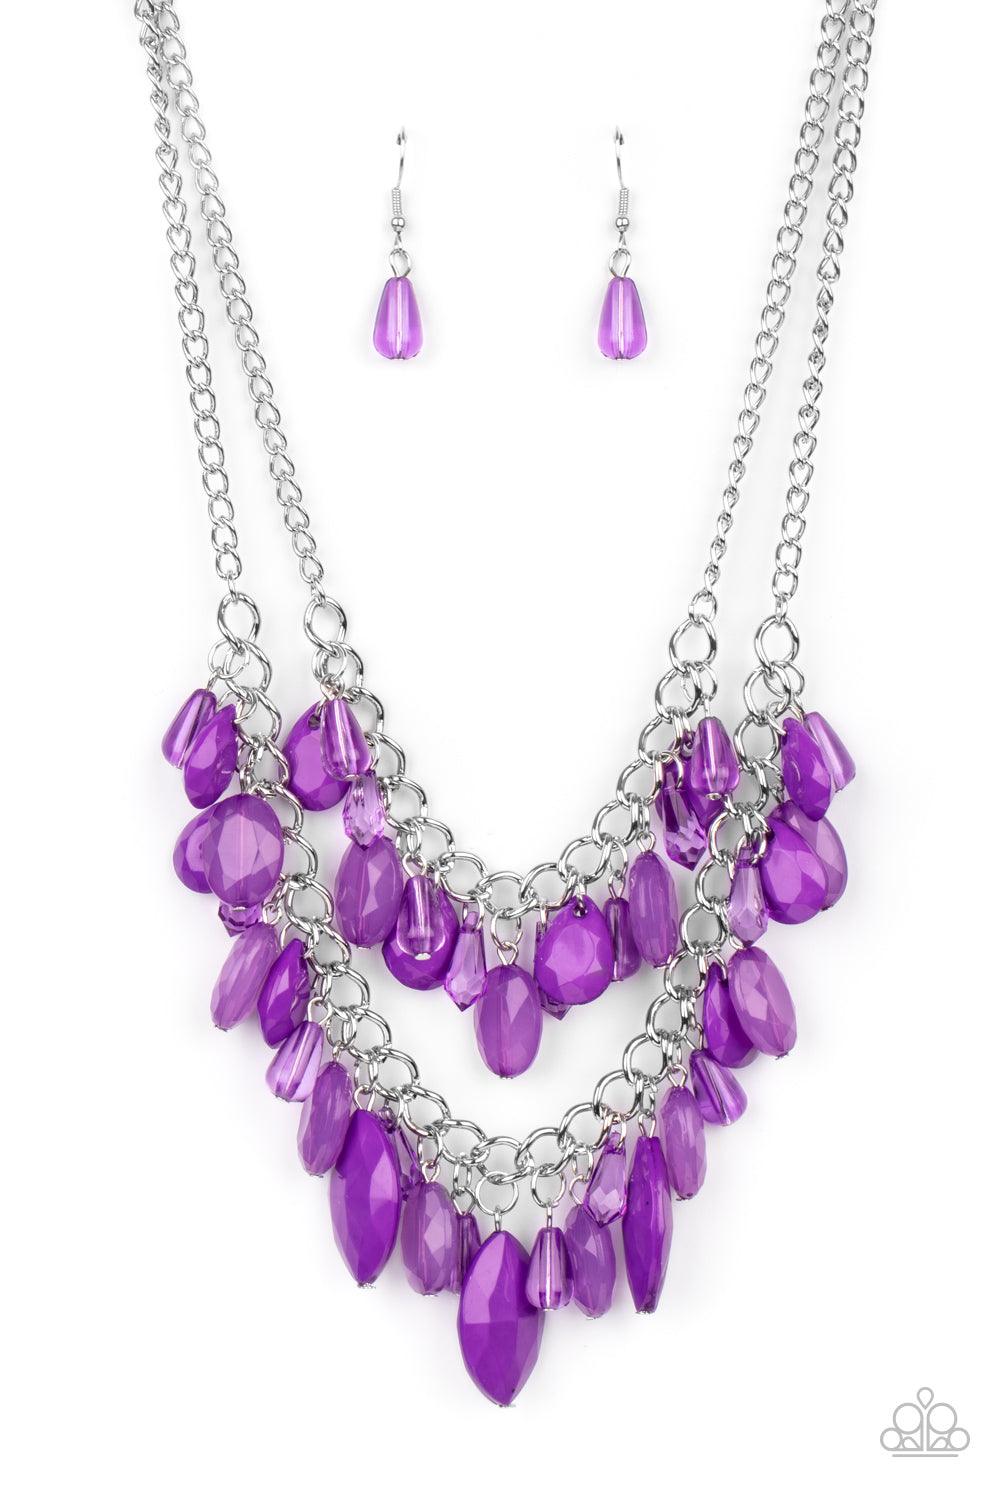 Paparazzi Accessories Midsummer Mixer - Purple Varying in opacity, a vivacious collection of purple oval and teardrop acrylic and crystal-like beads cascade from two bold silver chains below the collar for a flirtatiously layered look. Features an adjusta